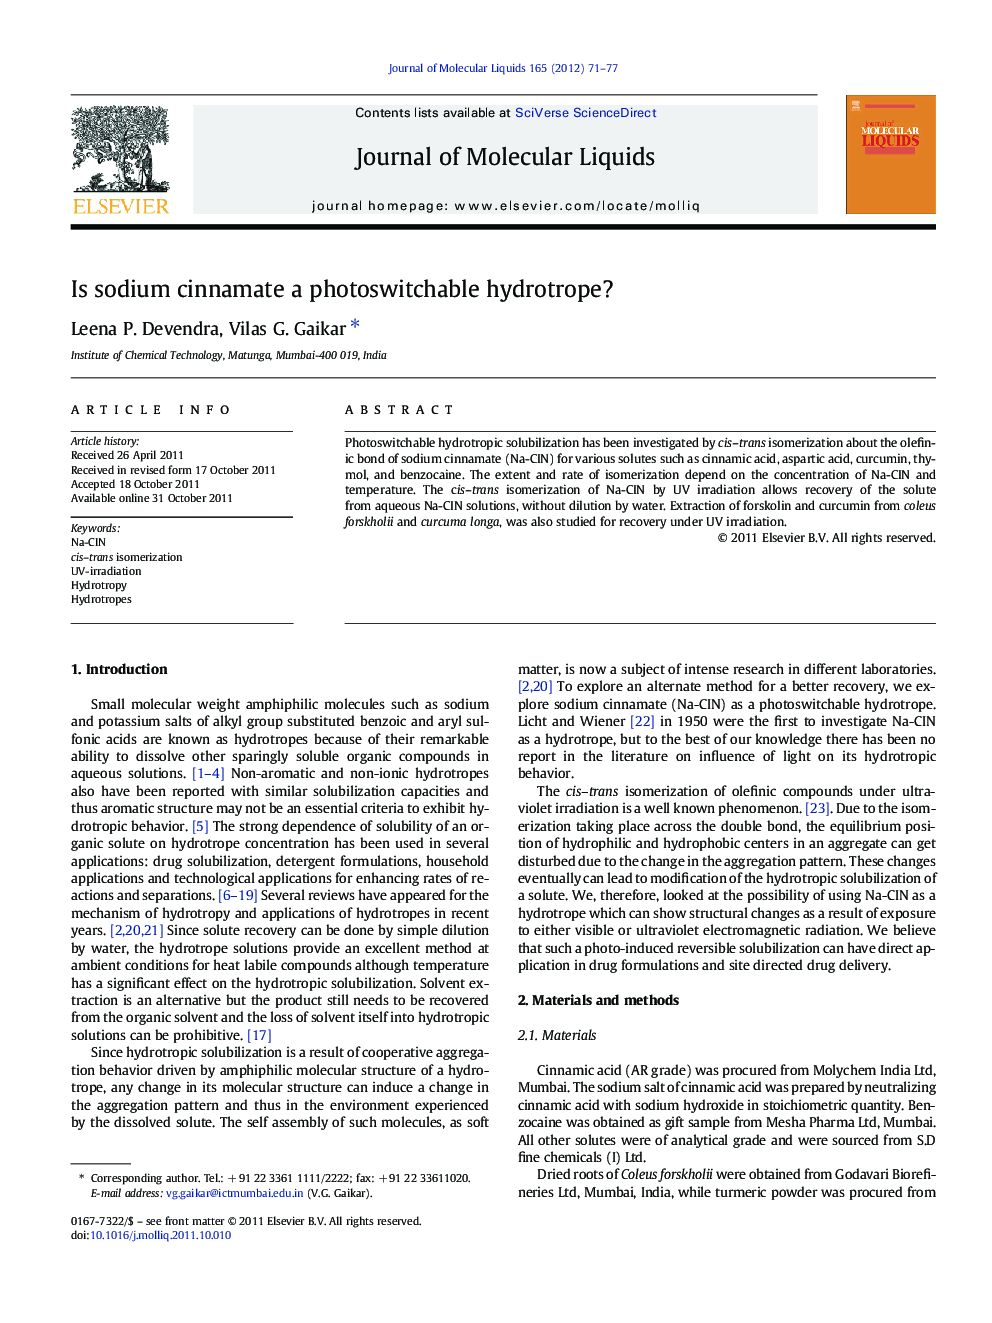 Is sodium cinnamate a photoswitchable hydrotrope?